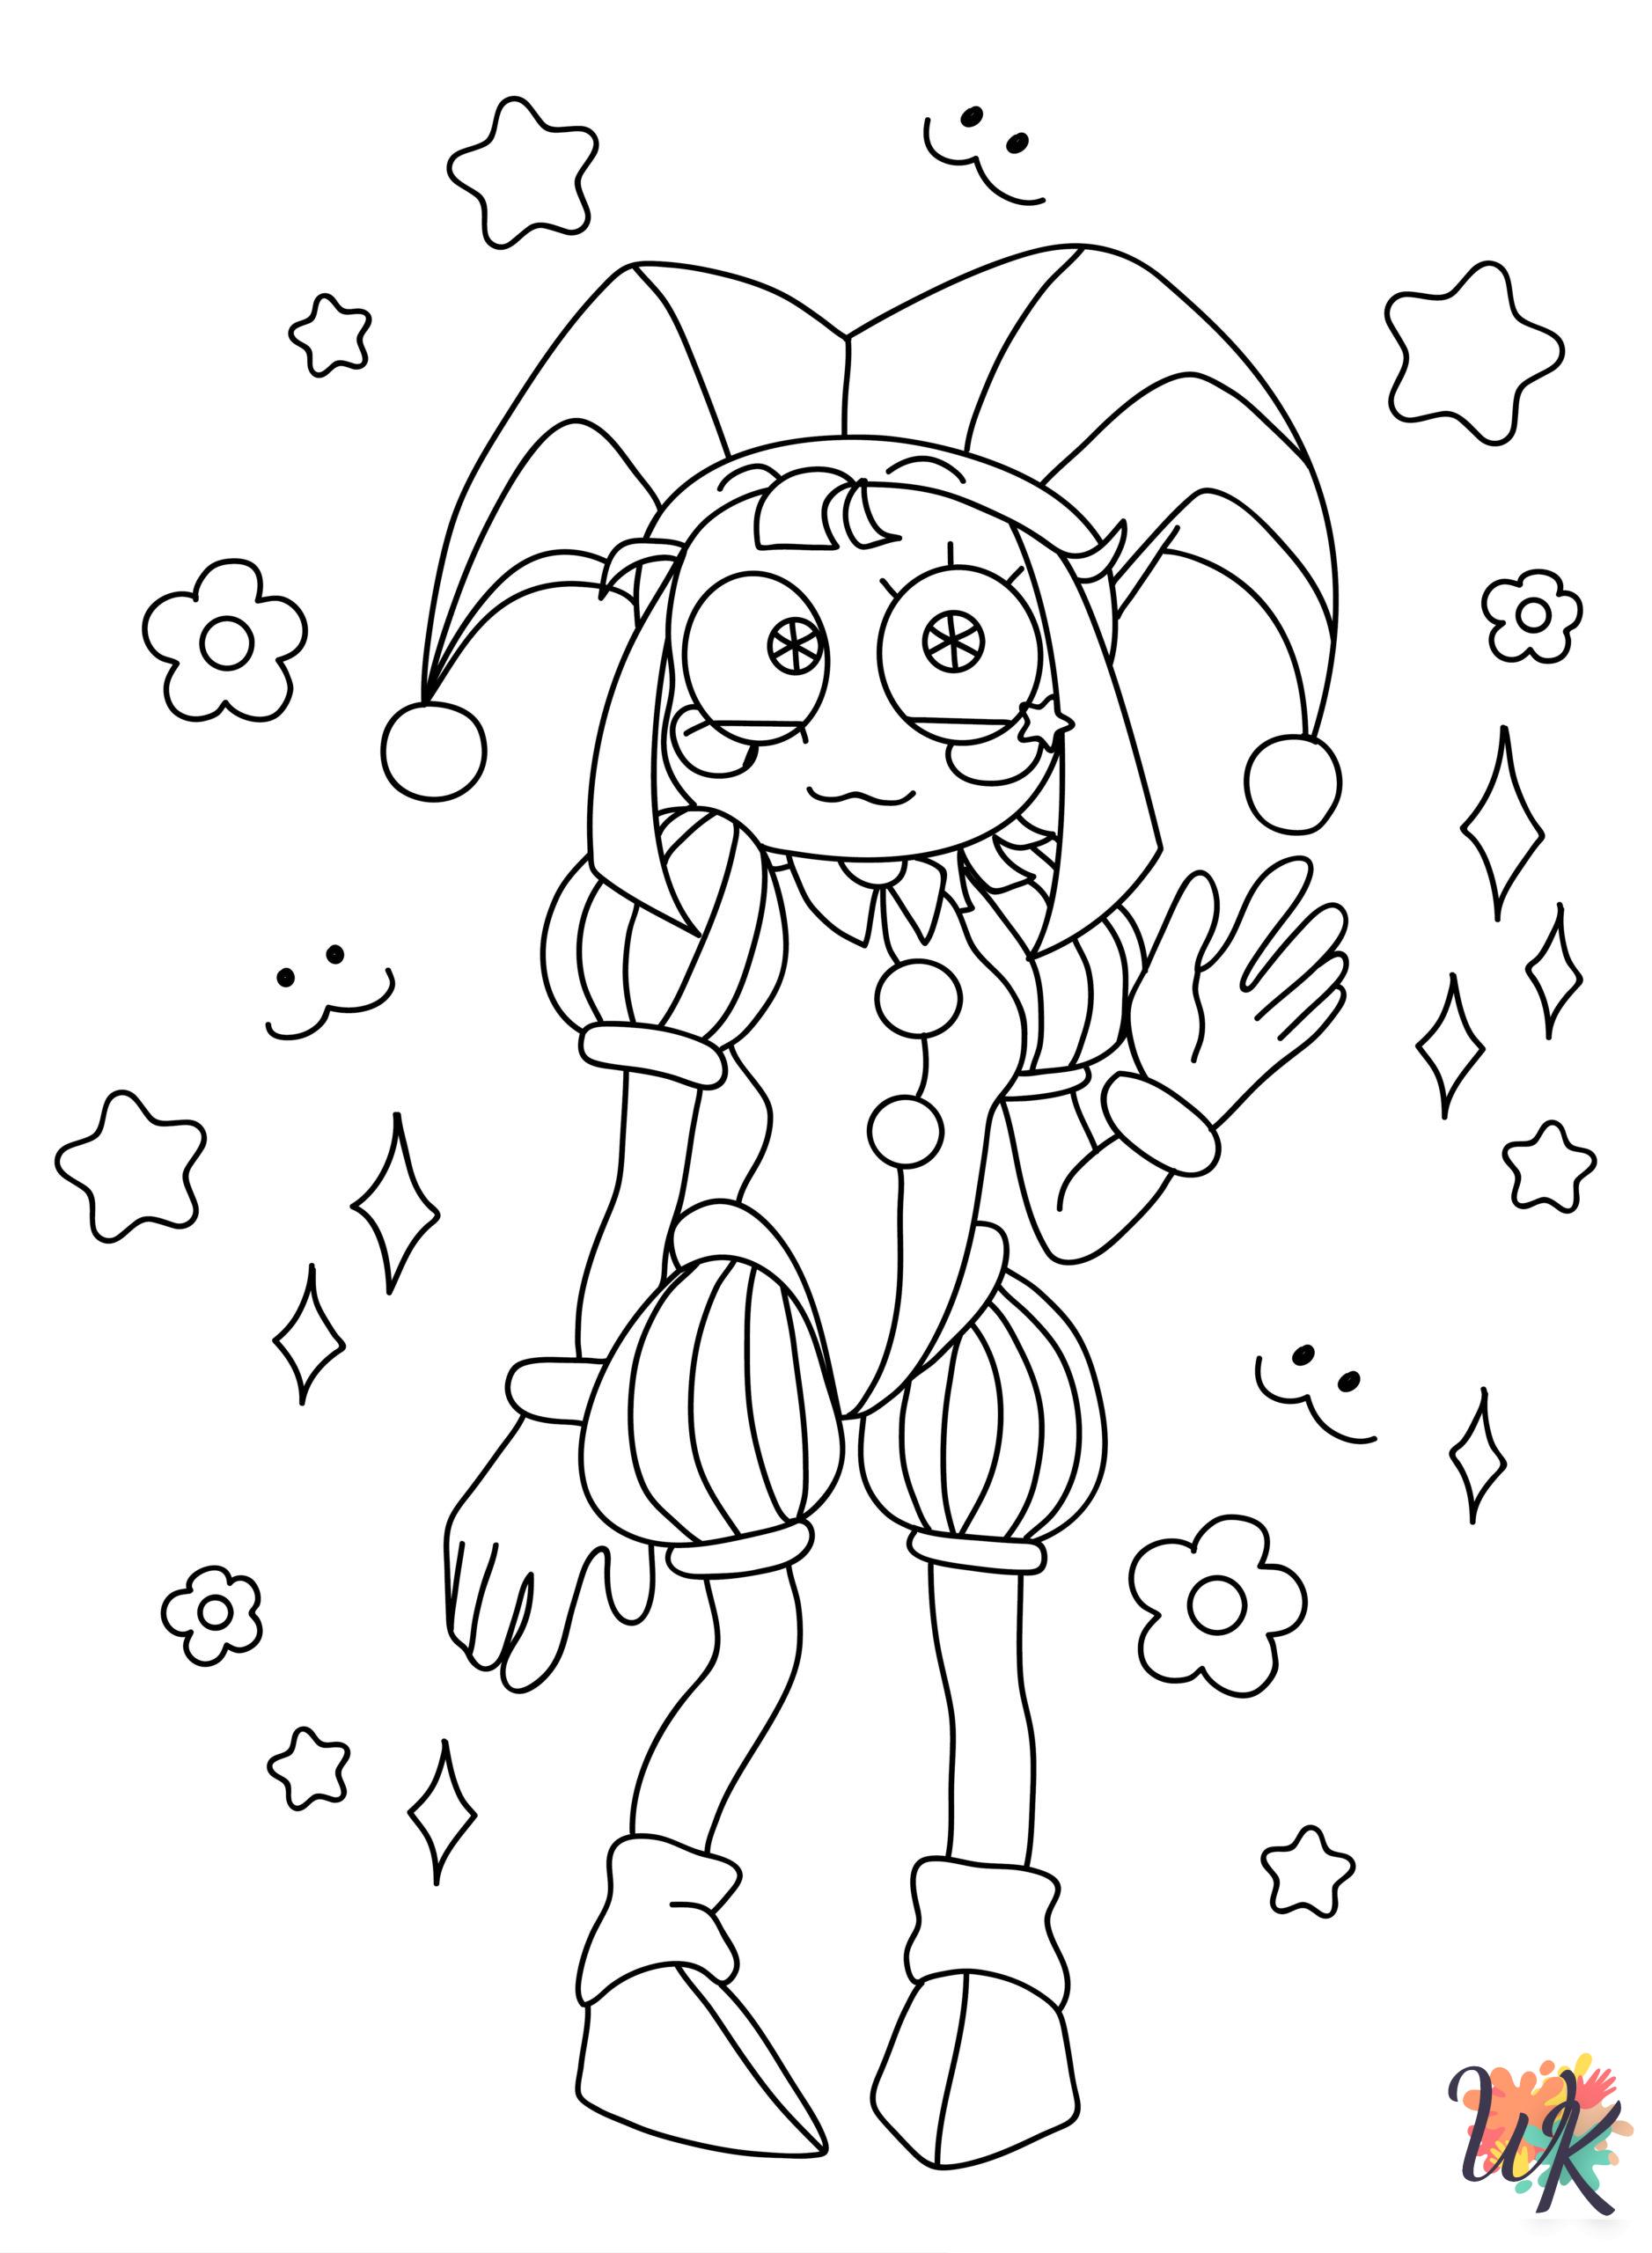 The Amazing Digital Circus coloring pages pdf